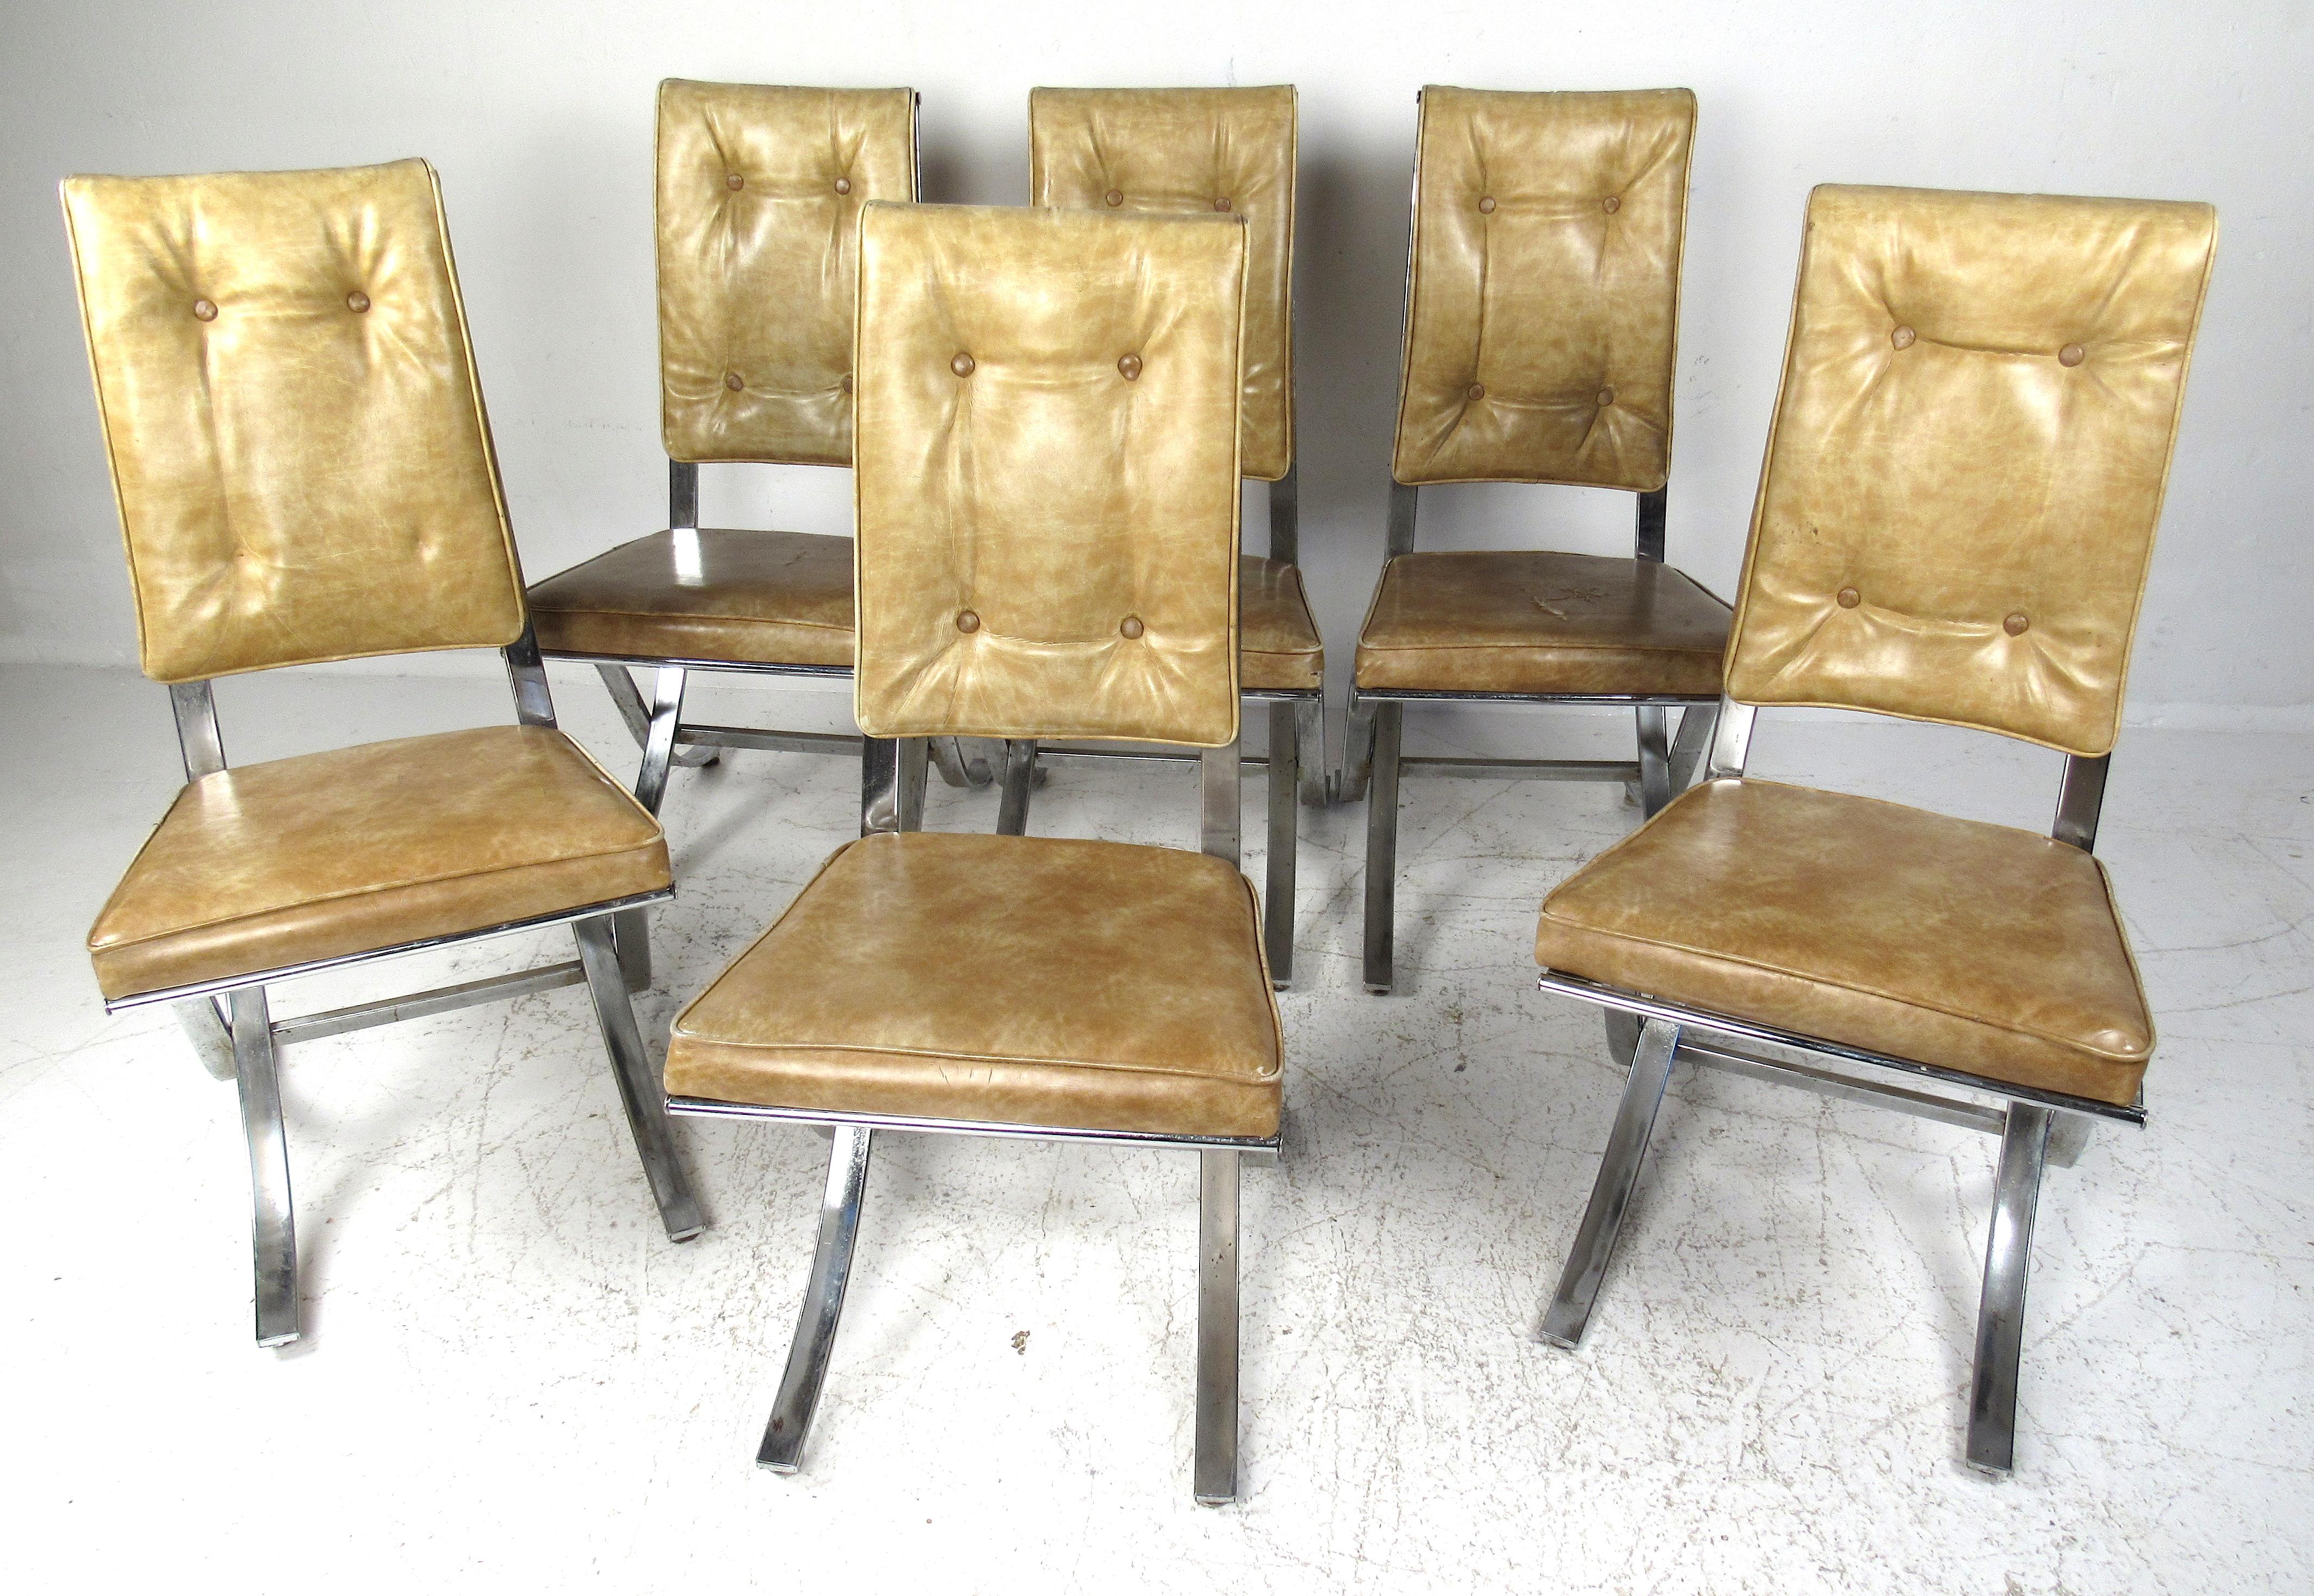 Set of six vintage tufted vinyl and chrome dining chairs by Brooklyn based Contempo Company. Classic 1960s styling dinette set, restoration required. Please confirm item location (NY or NJ) with dealer.